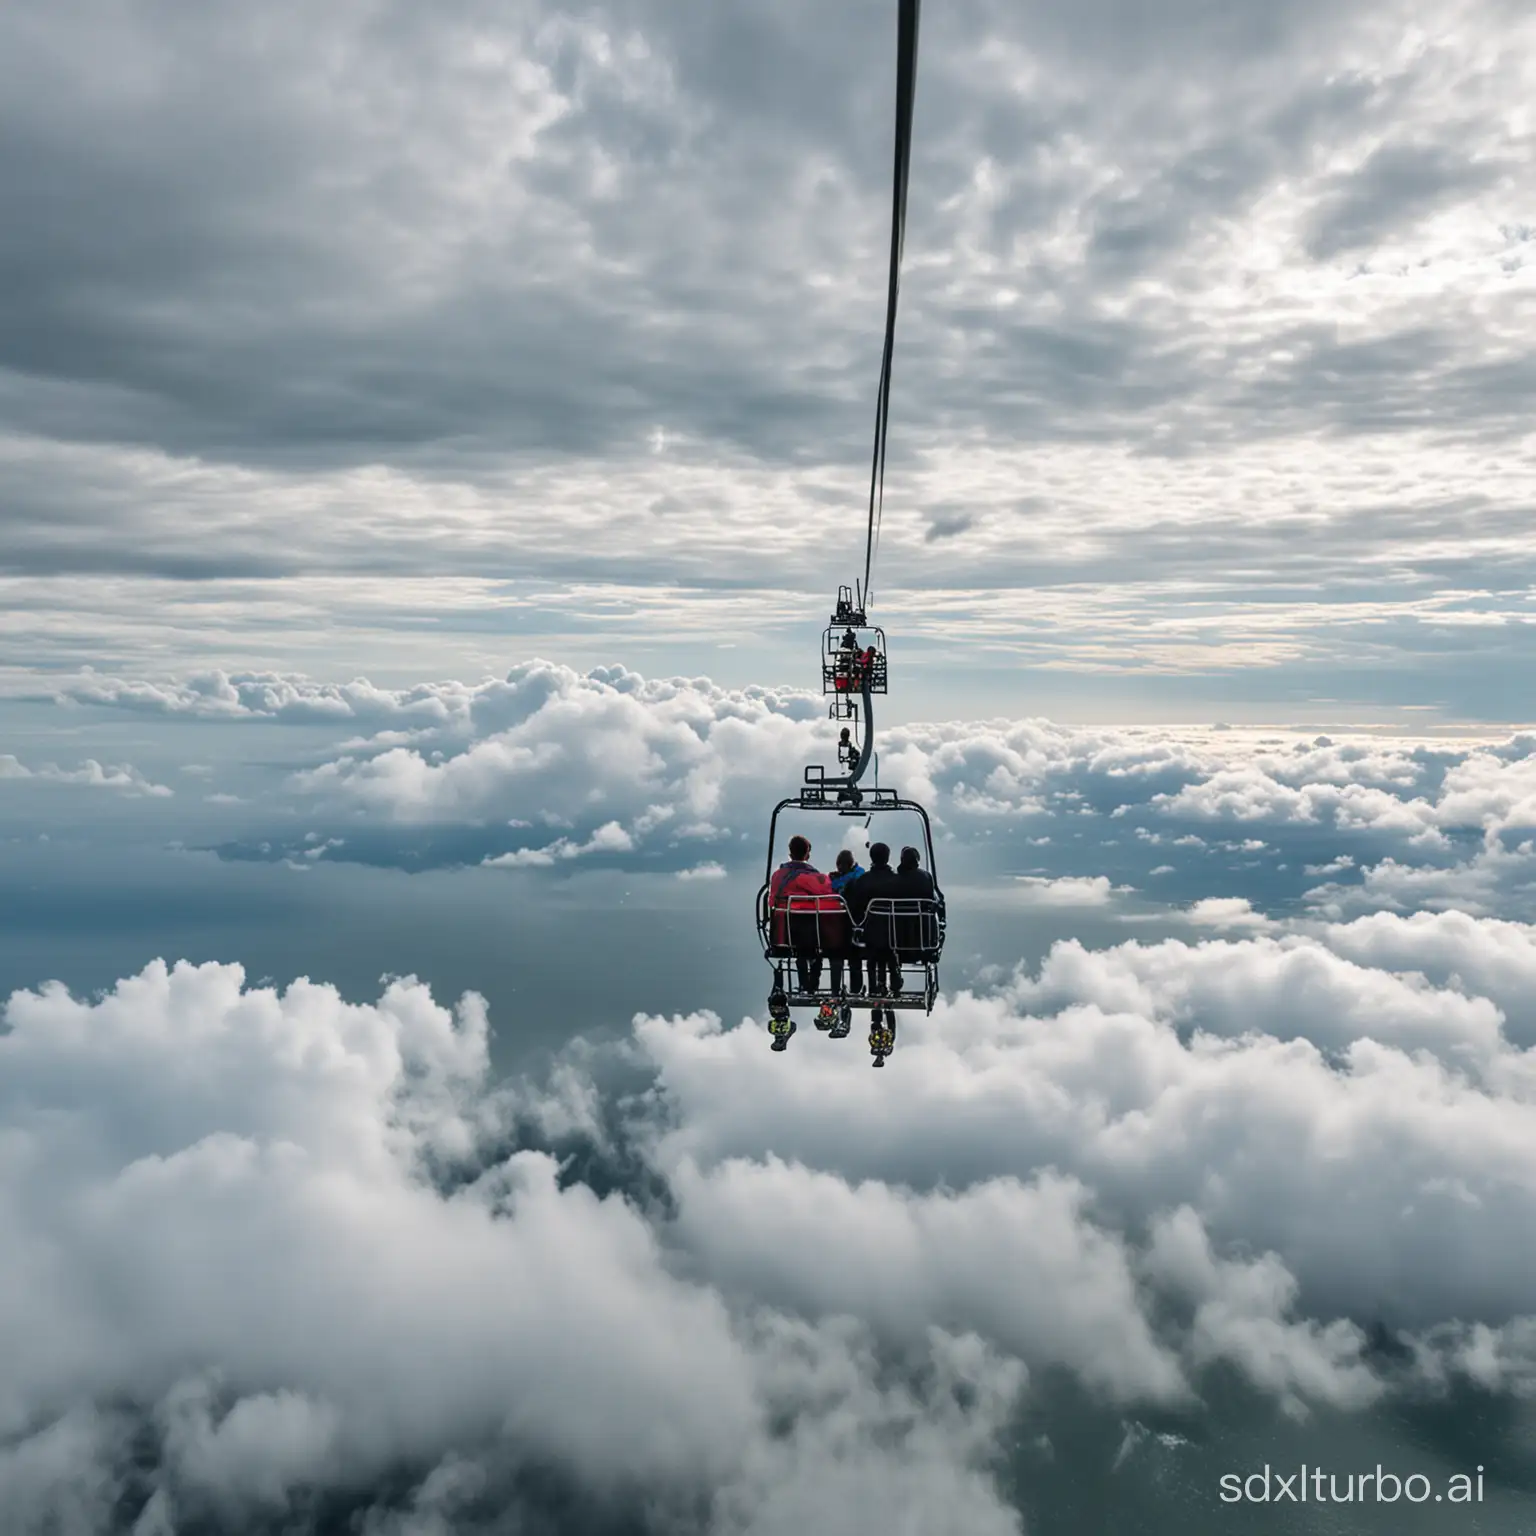 Sitting on the ski lift and flying from the amusement park to the sea, the surroundings include the sea under the clouds.